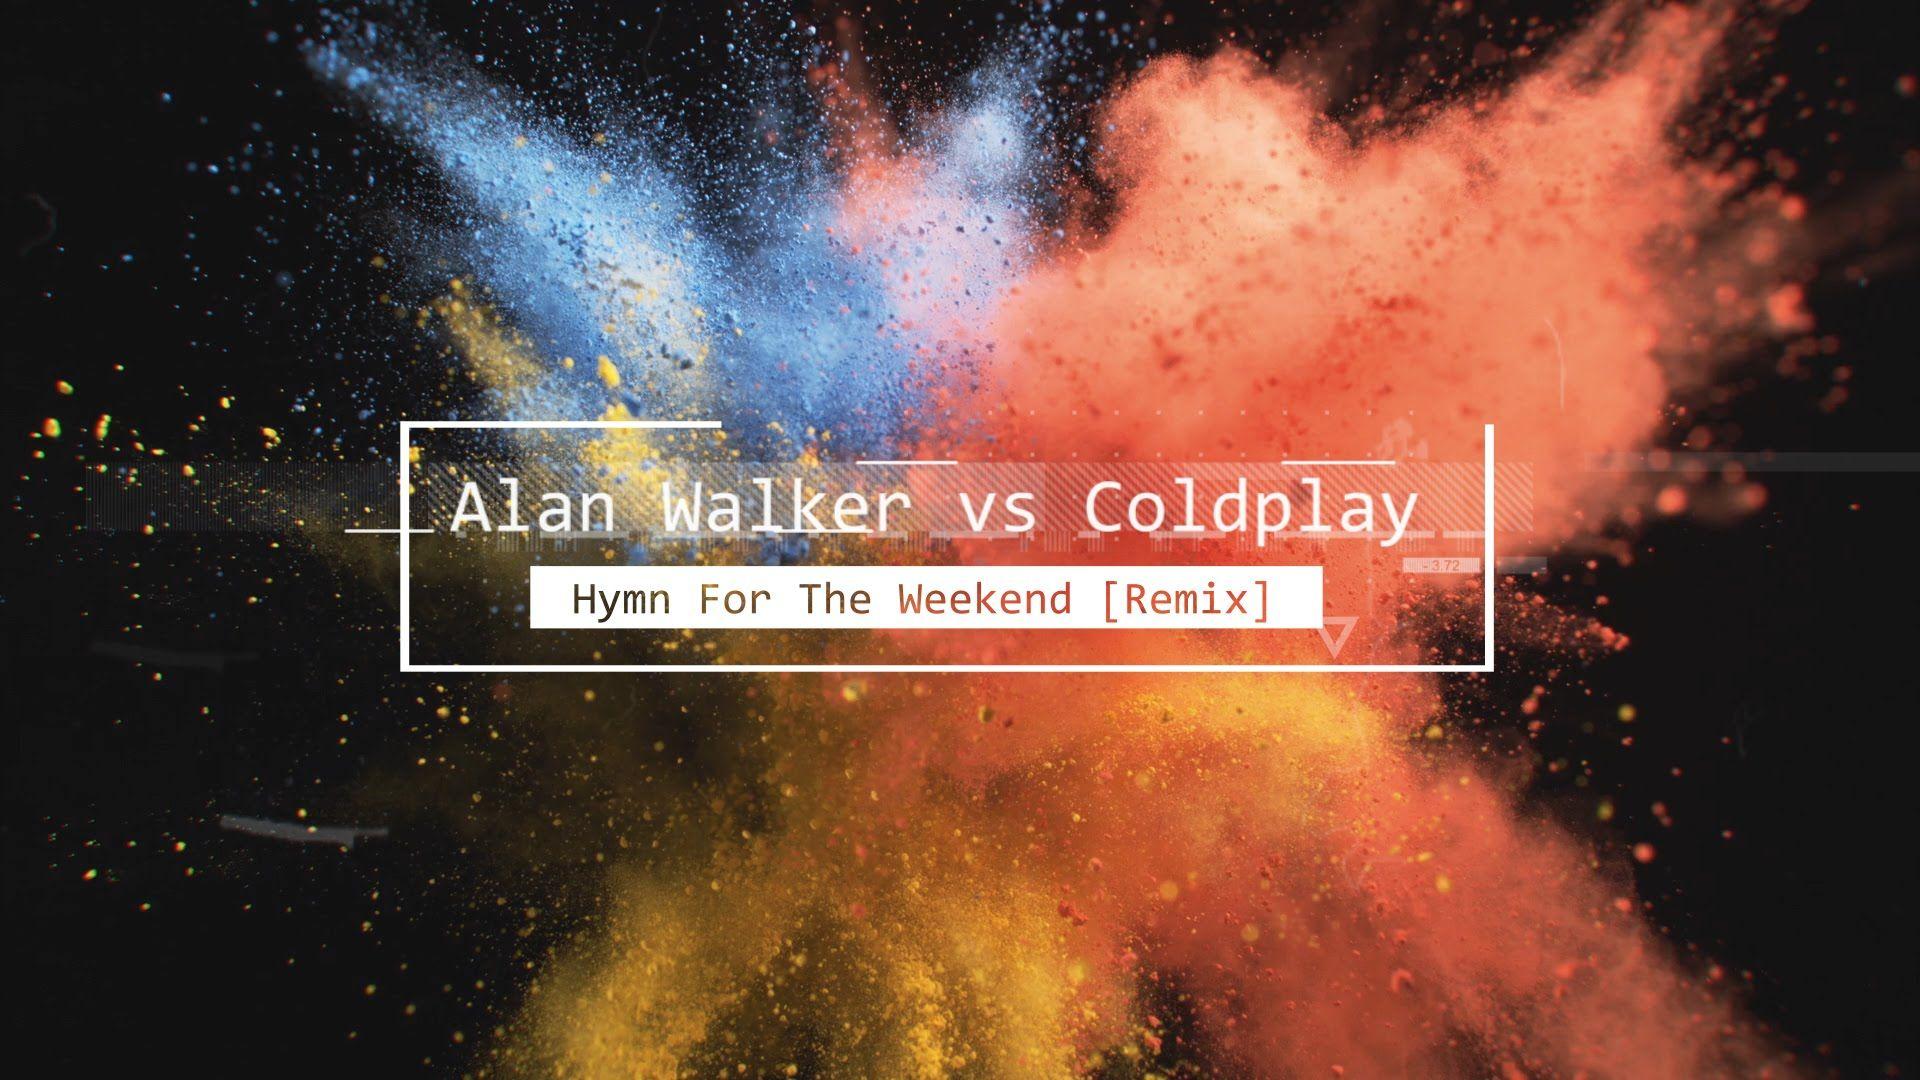 Alan Walker vs Coldplay For The Weekend [Remix]